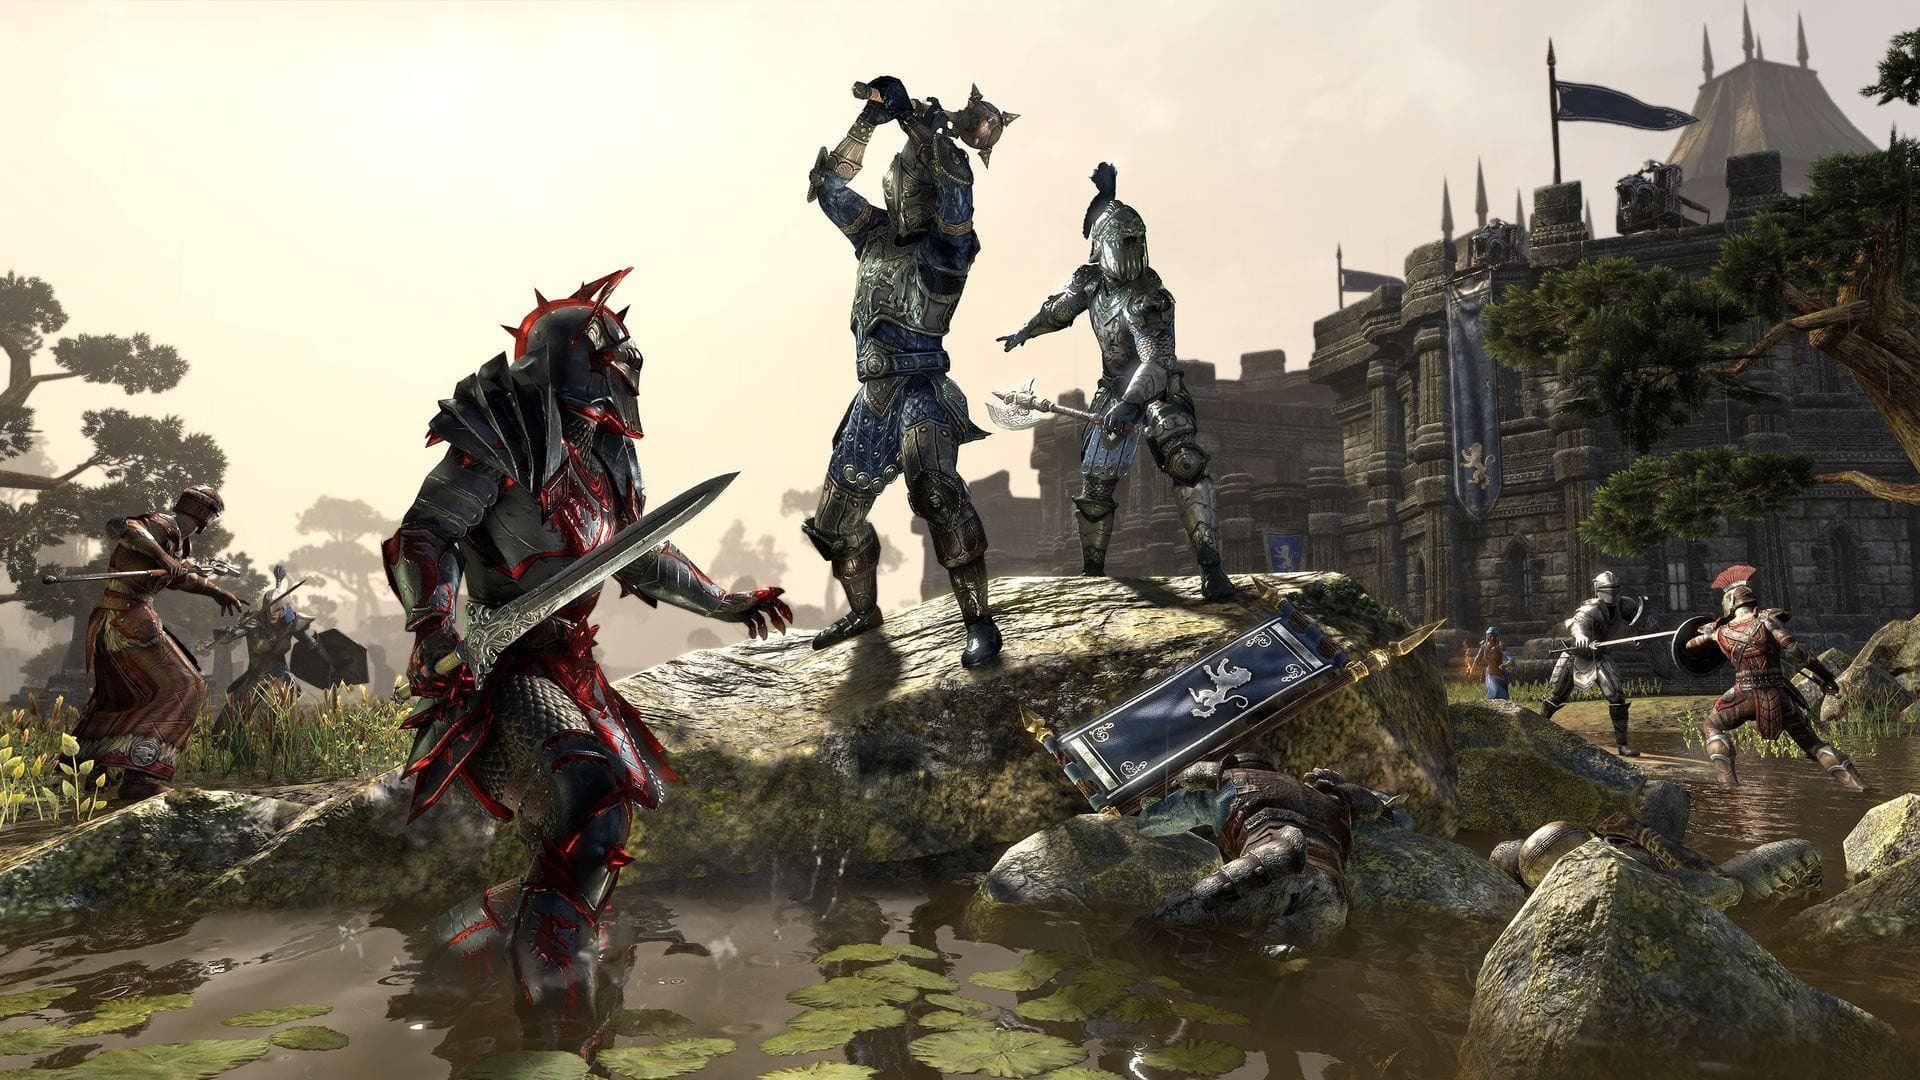 Save Up to 50% and Play Free during QuakeCon At Home - The Elder Scrolls  Online